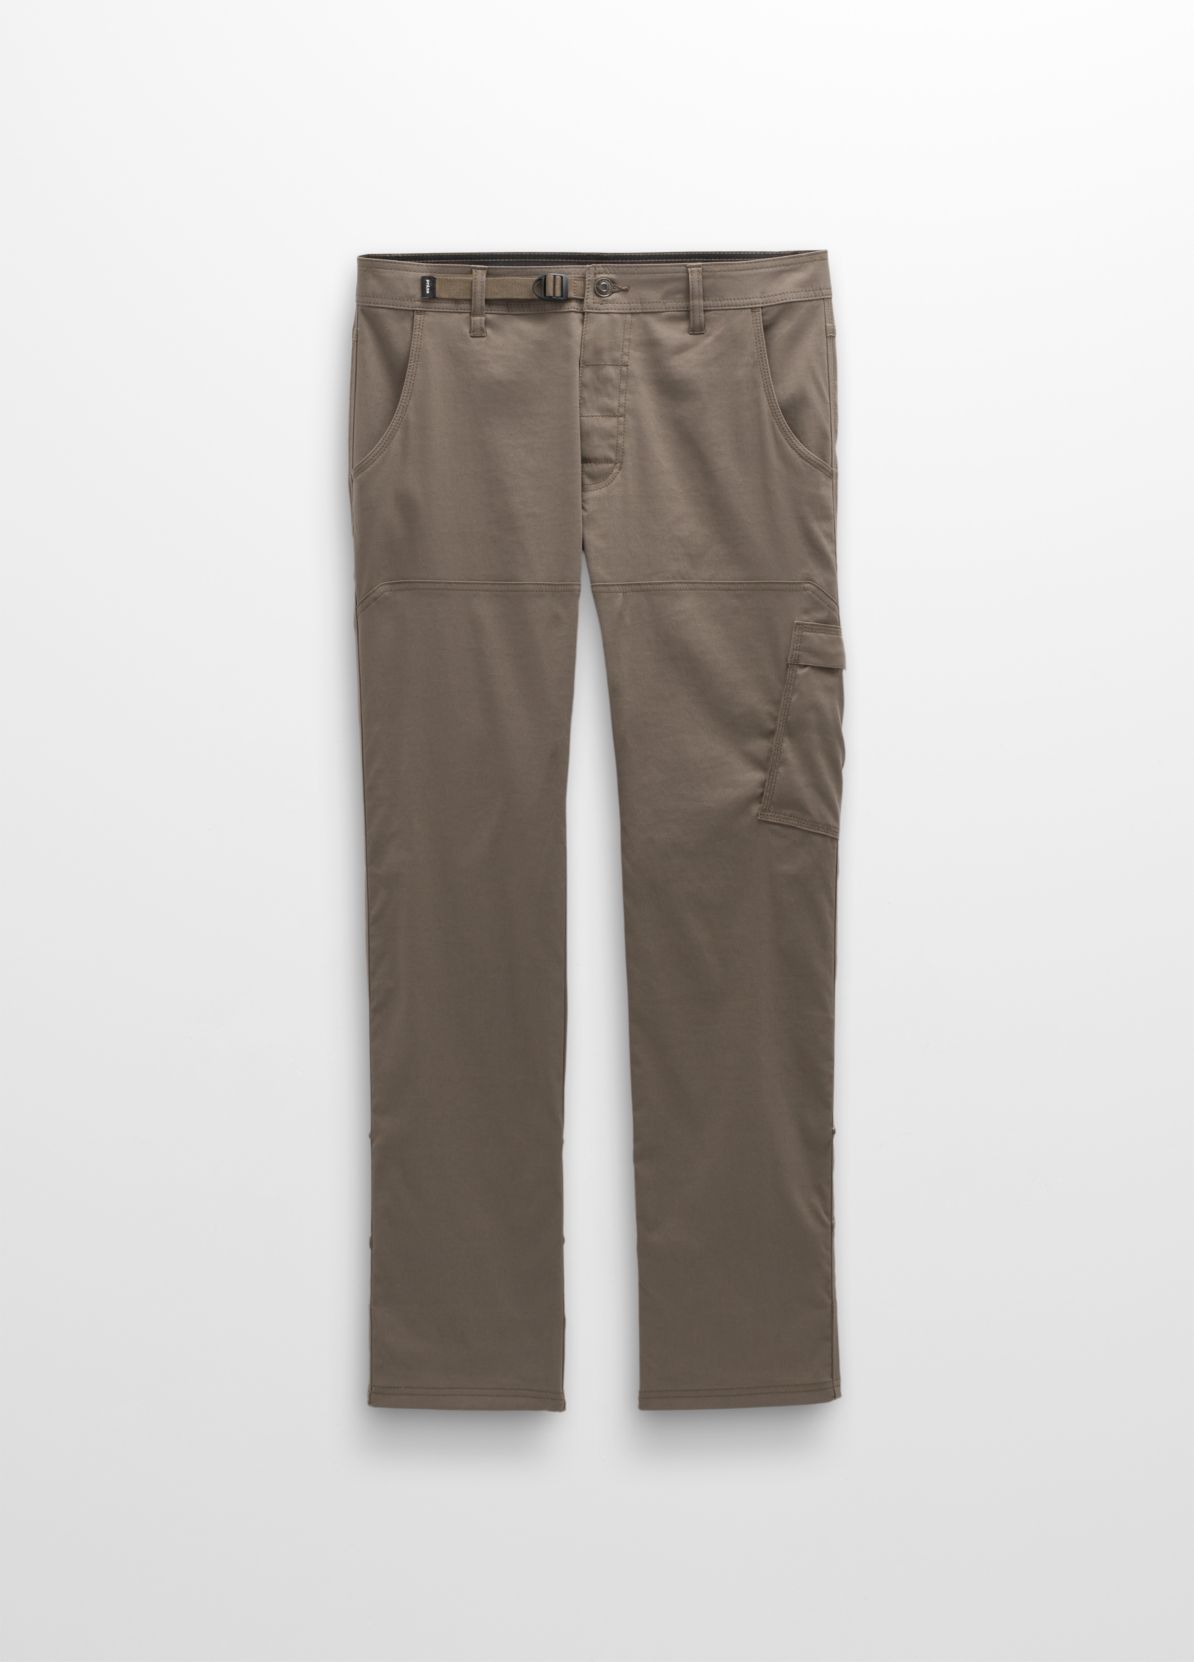 Prana Stretch Zion Straight 32 Pant – River Rock Outfitter